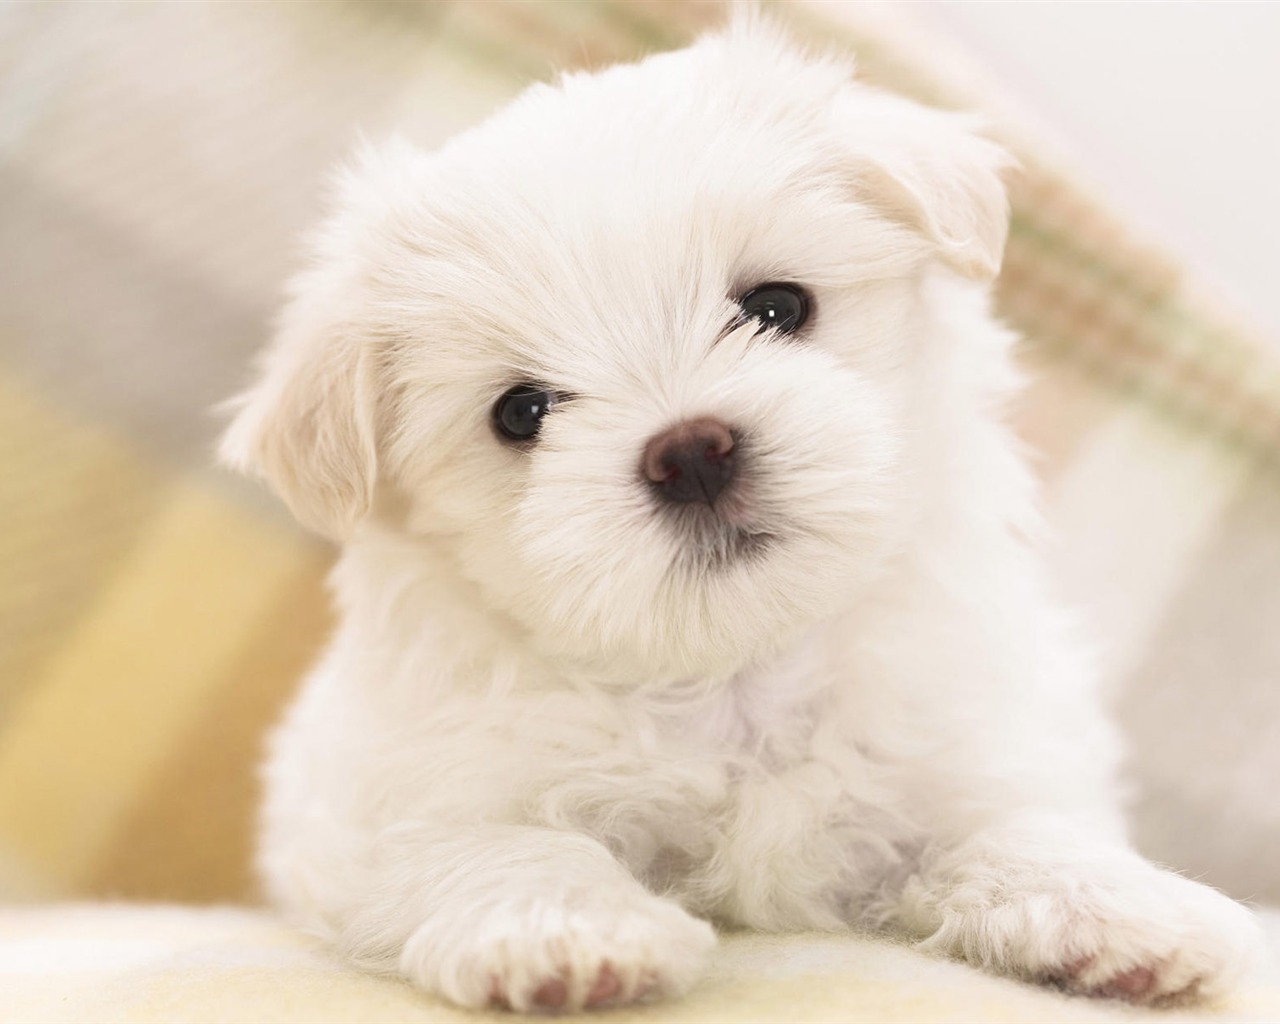 Puppy Photo HD wallpapers (8) #6 - 1280x1024